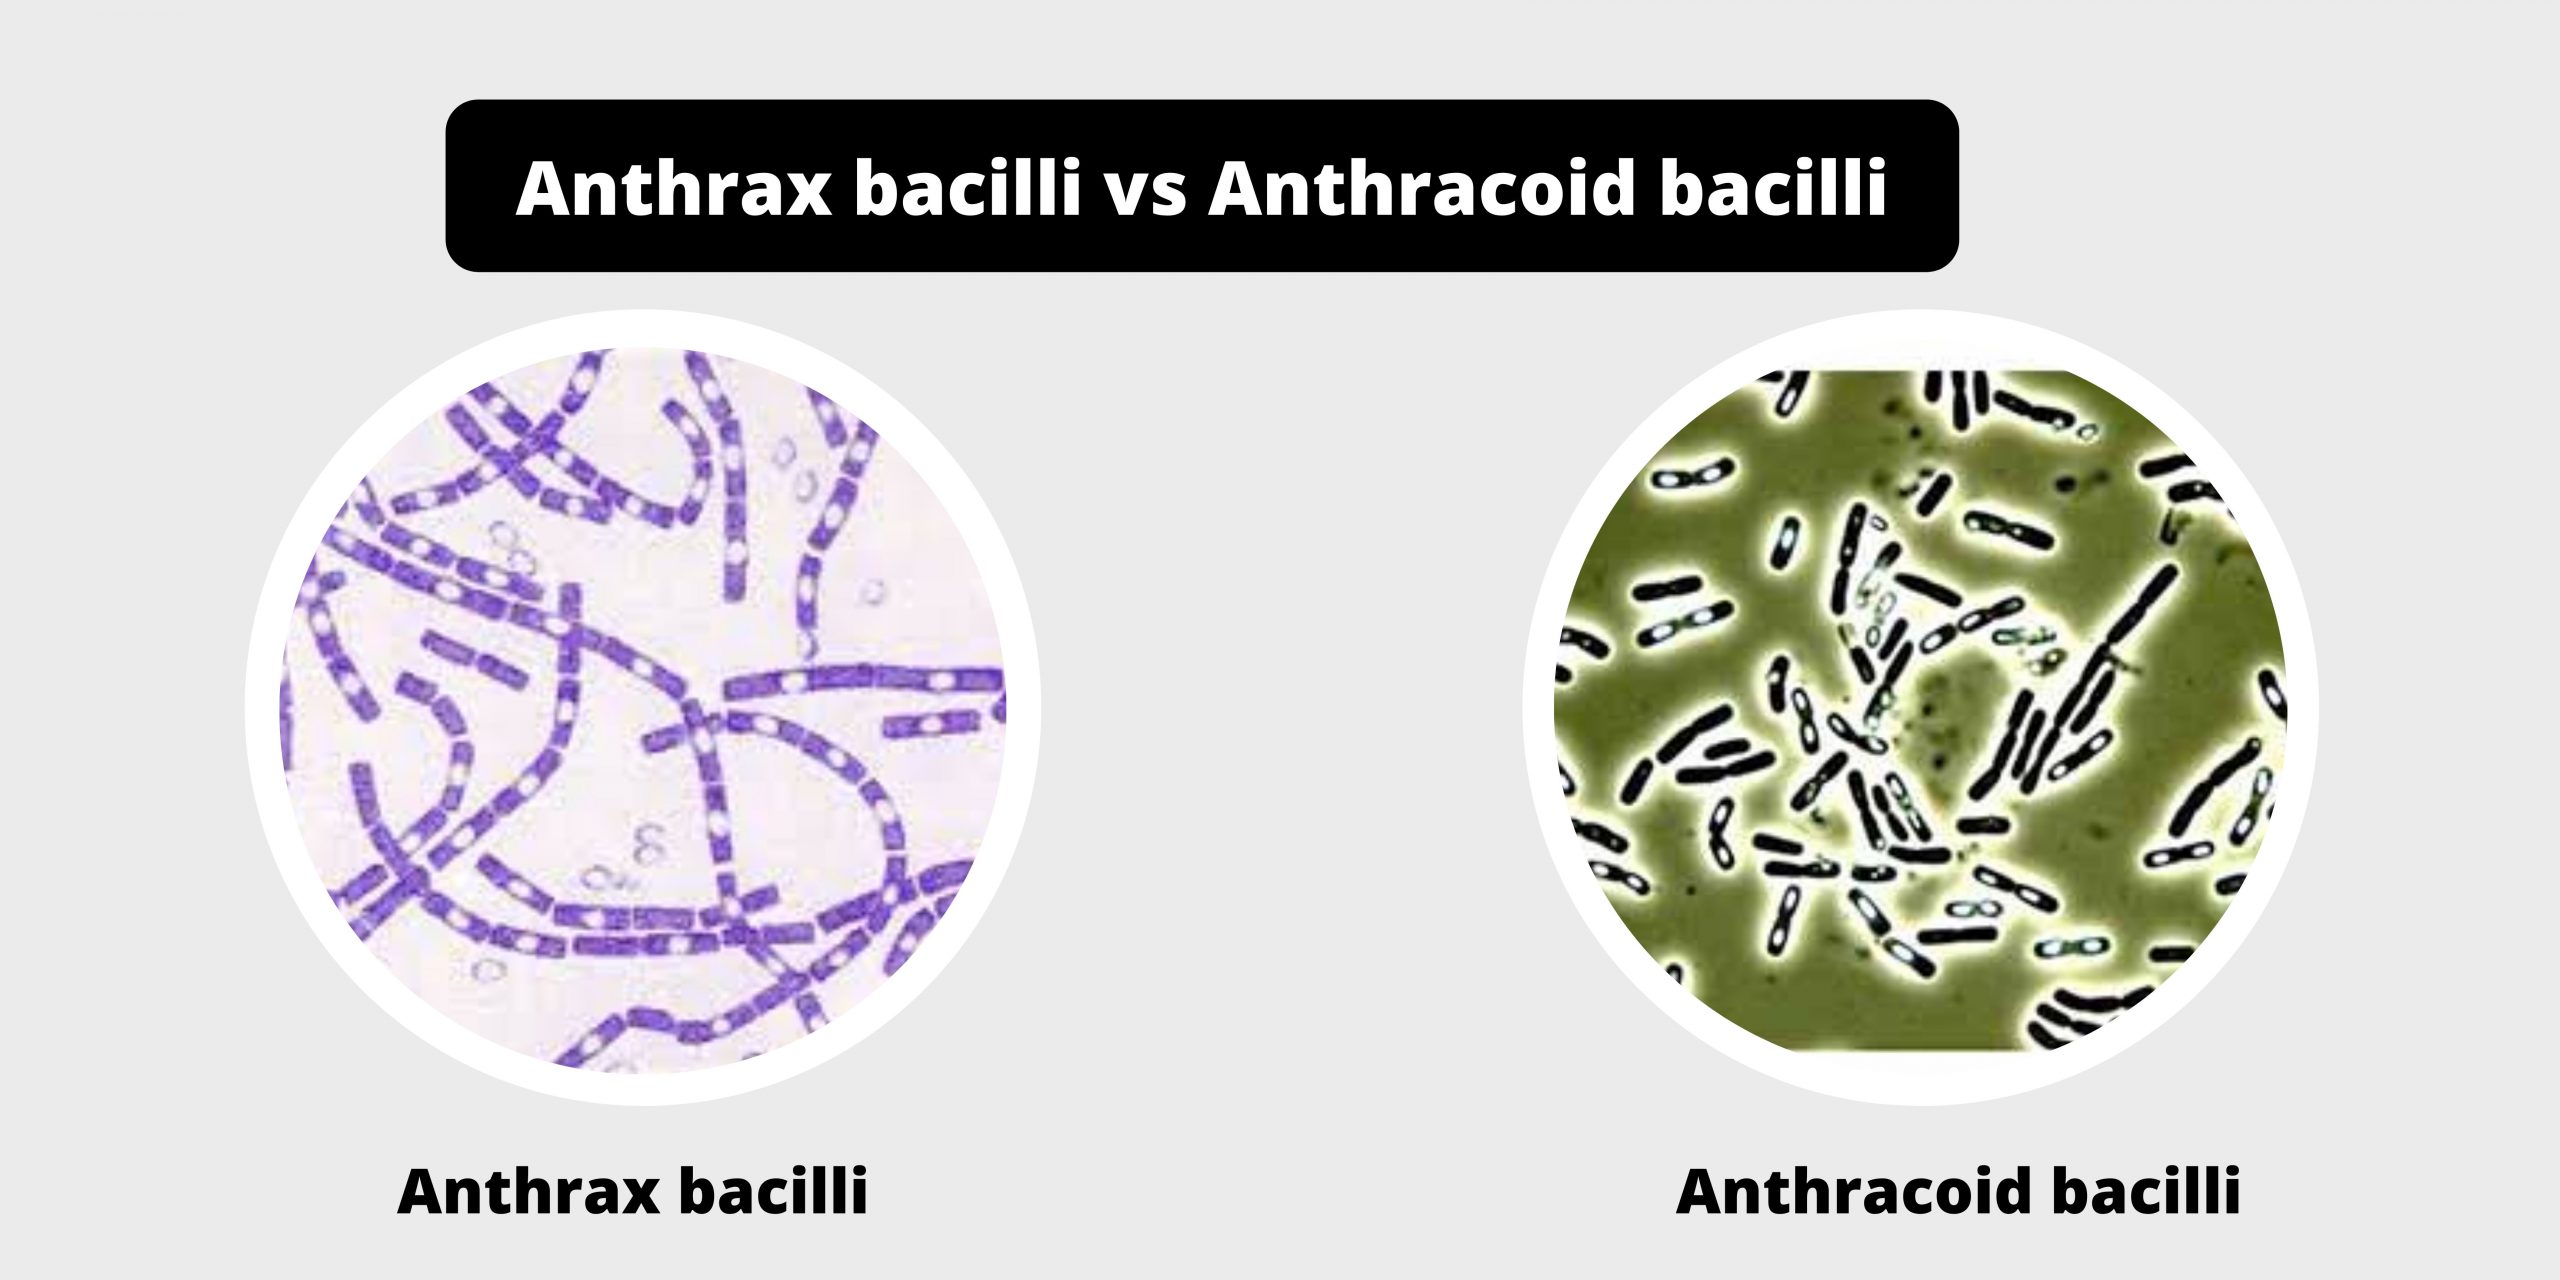 Differences between Anthrax bacilli and Anthracoid bacilli